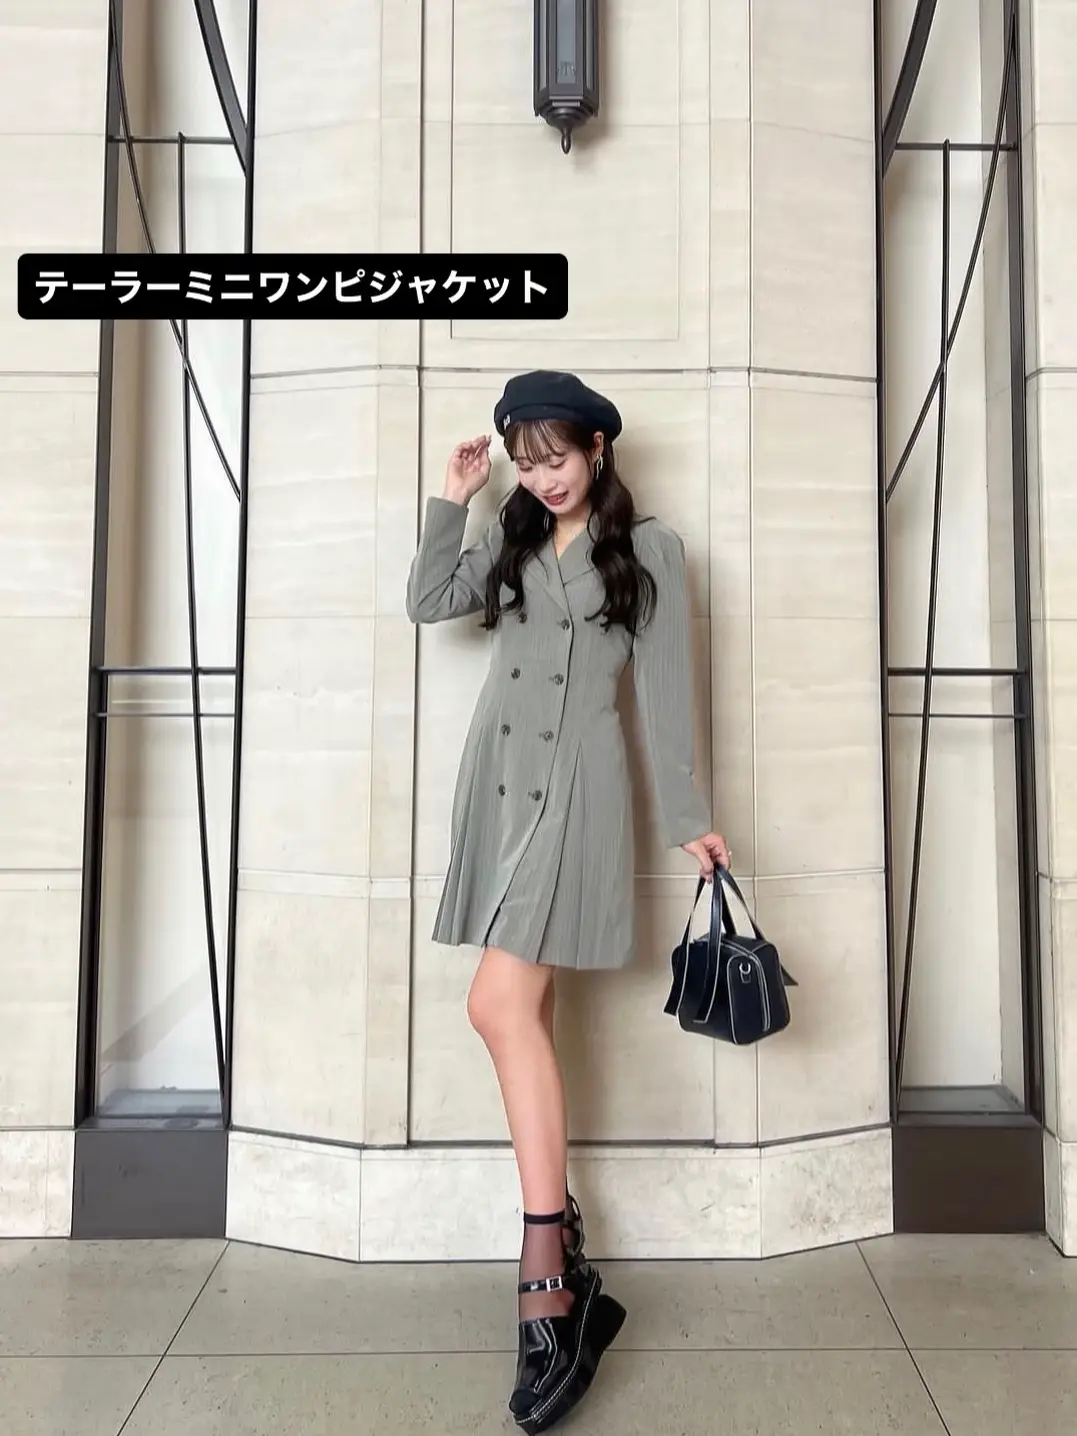 Tailor Mini Jacket Dress   | Gallery posted by yunacandy | Lemon8